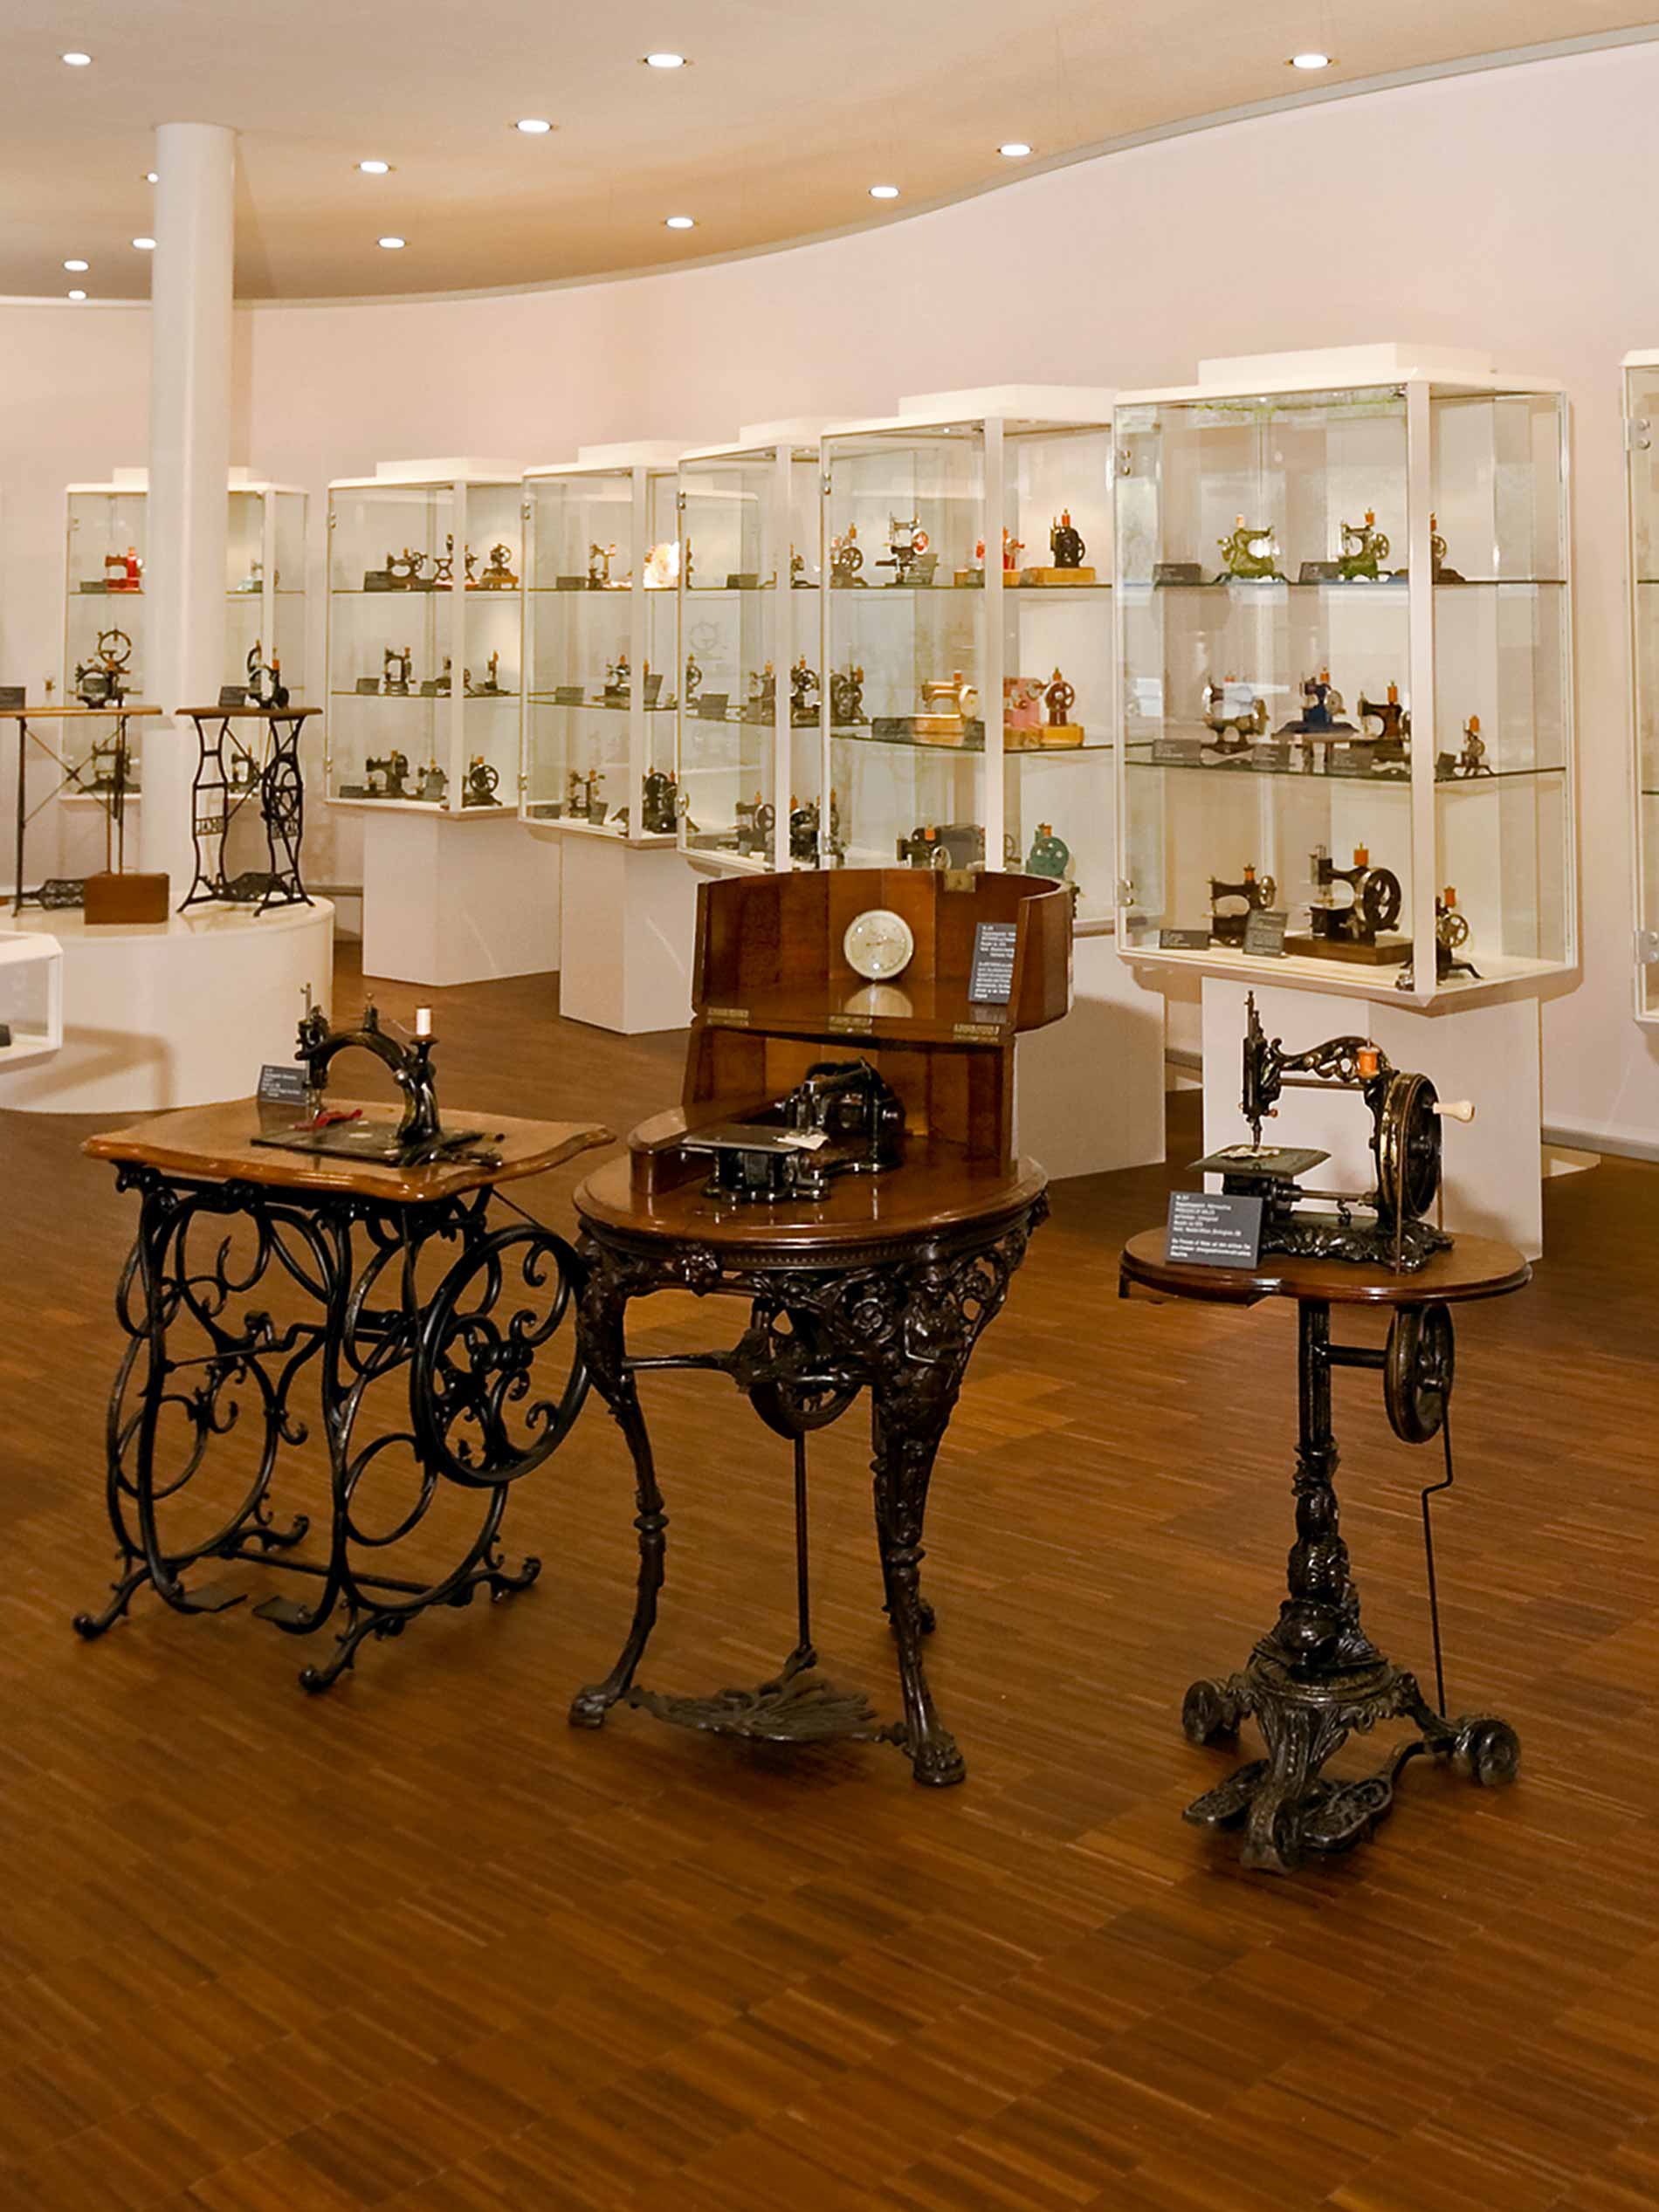 interior of the museum, three historic sewing machines in the foreground and multiple glass vitrines with exhibition pieces in the background | mey®